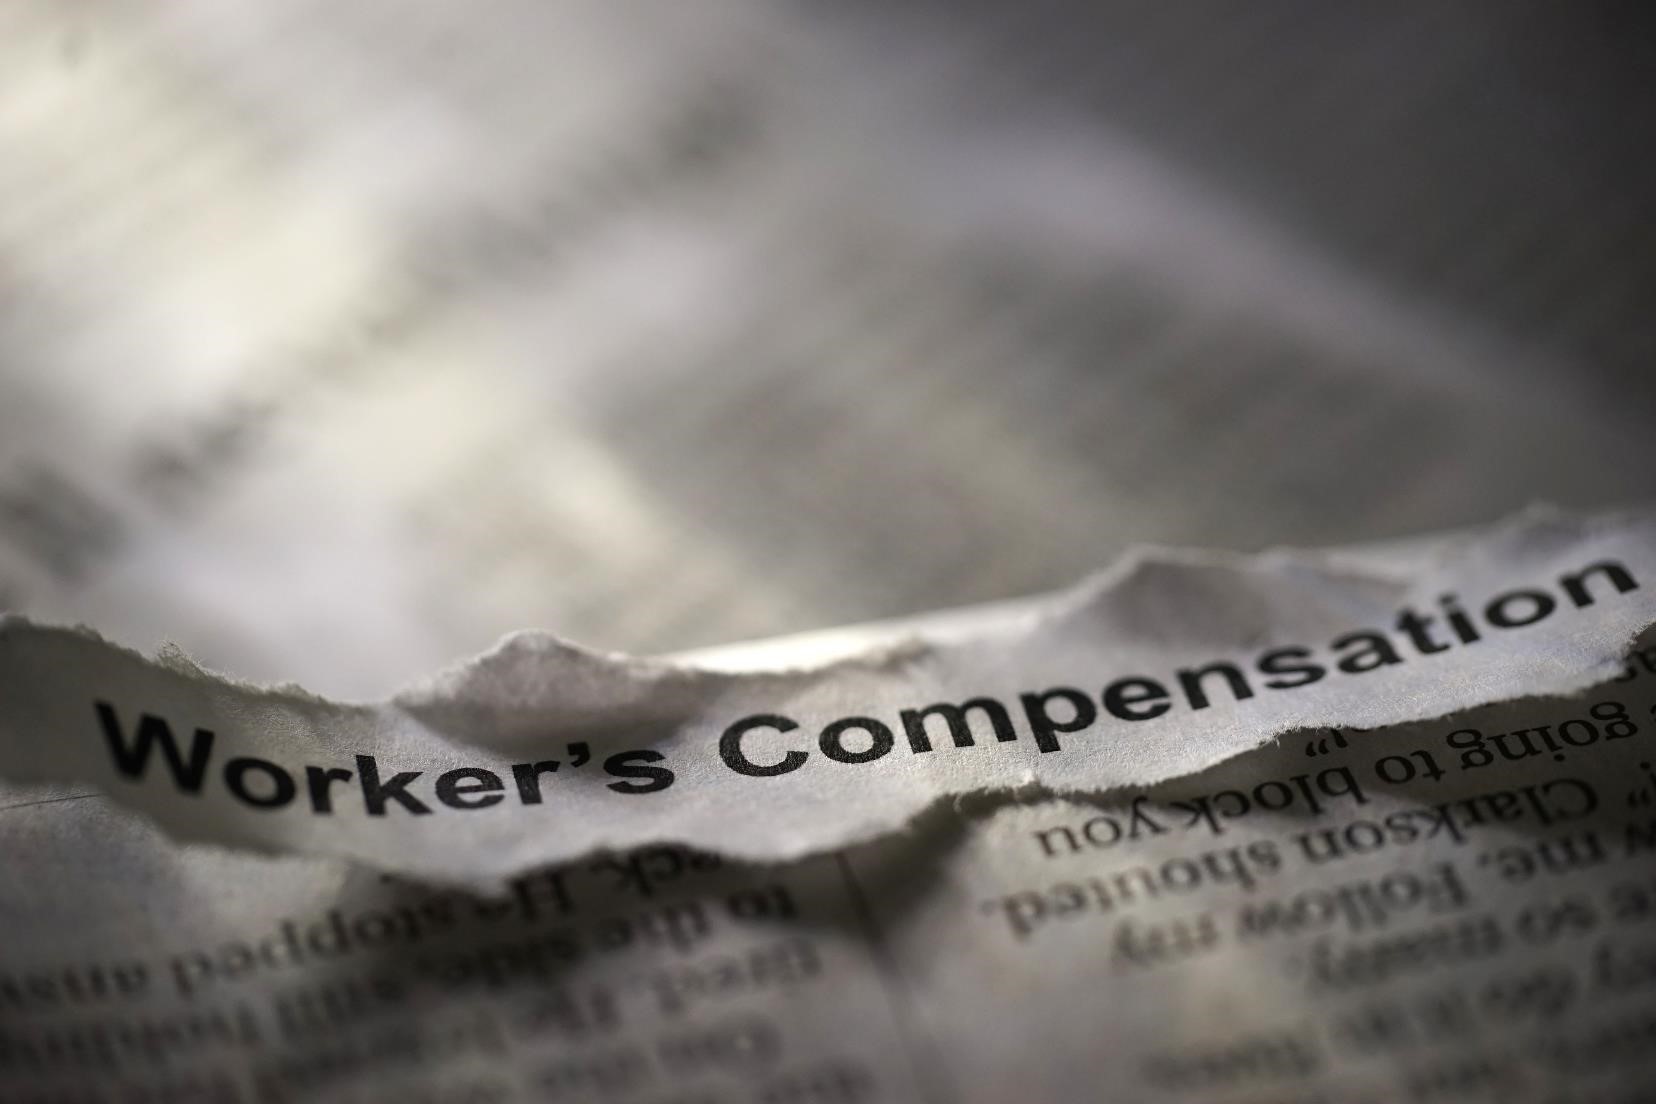 Workers’ Compensation Safety Records